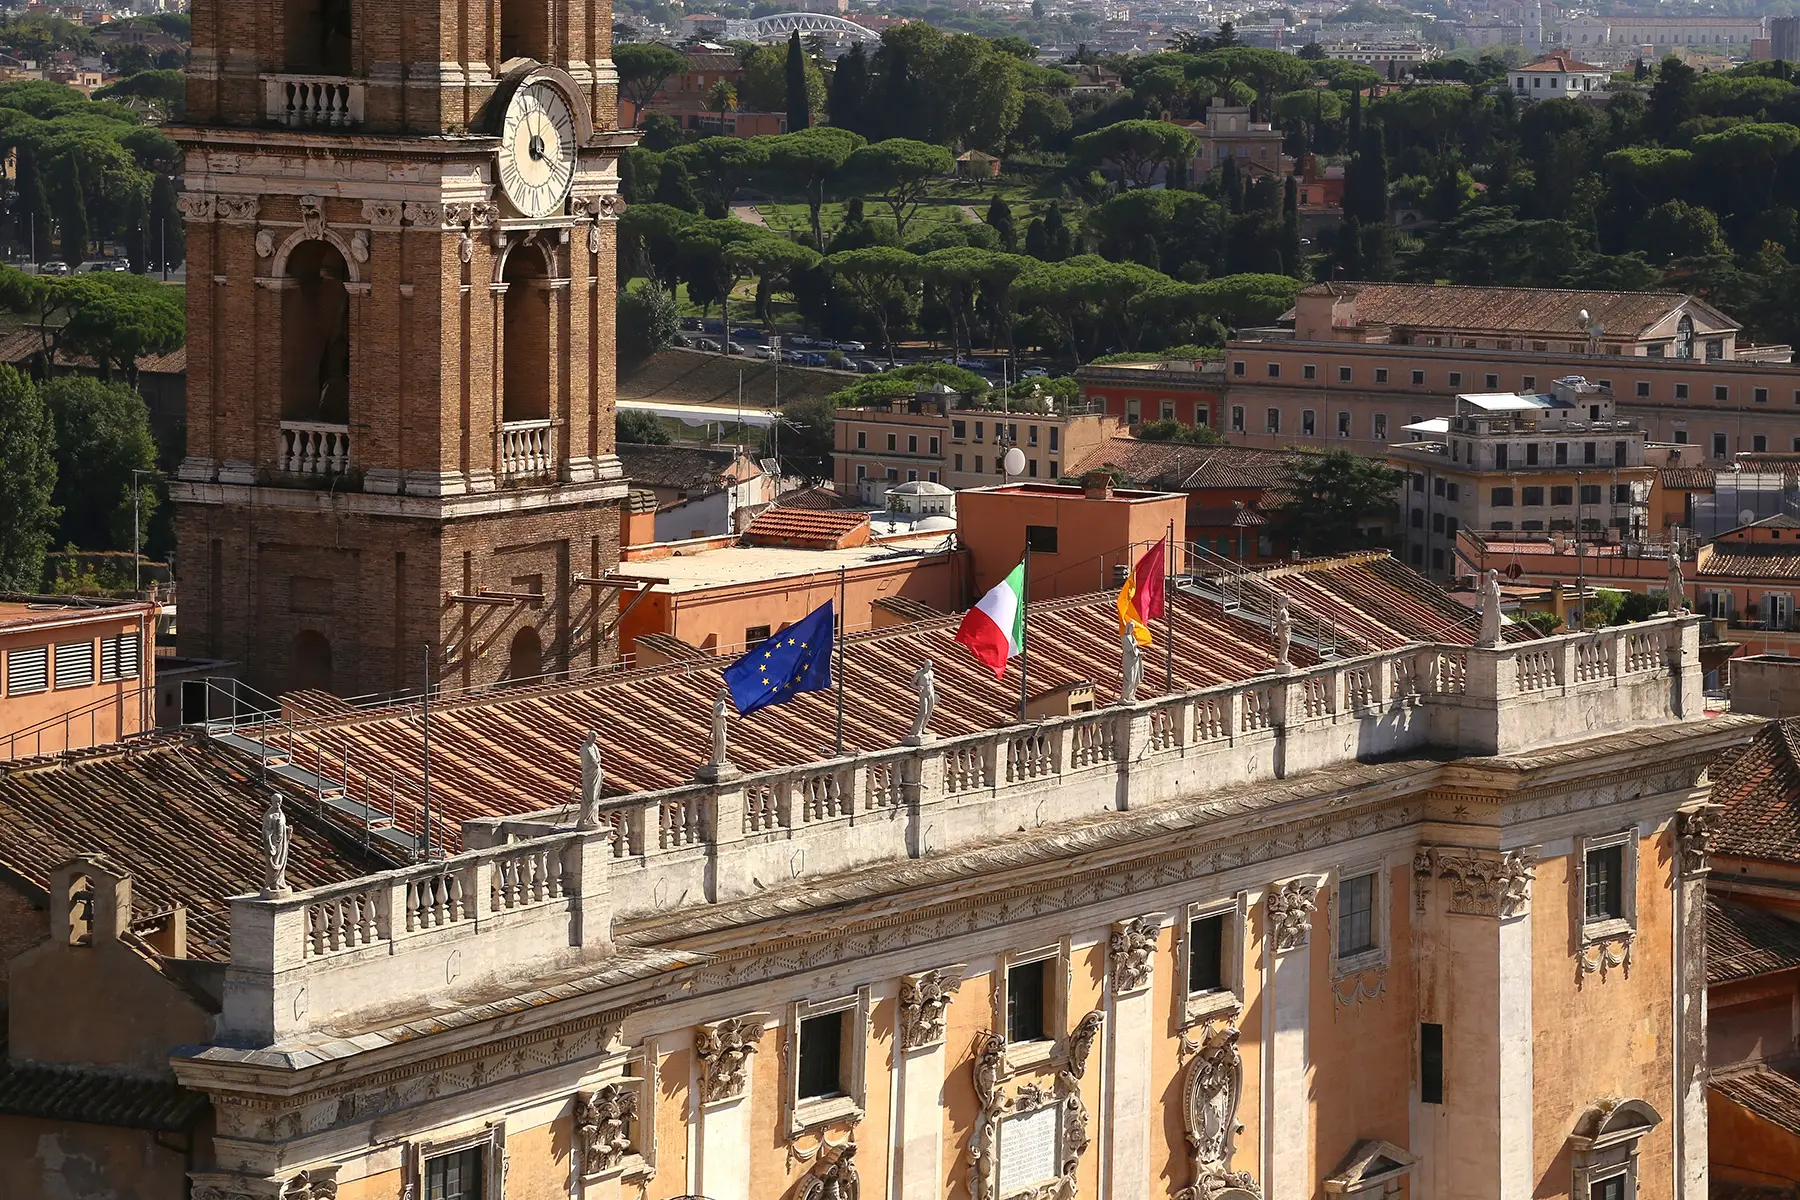 An old-fashioned parliamentary building with an EU flag, an Italian flag, and the flag of Rome (seems to be black, yellow, and red, but not entirely visible)